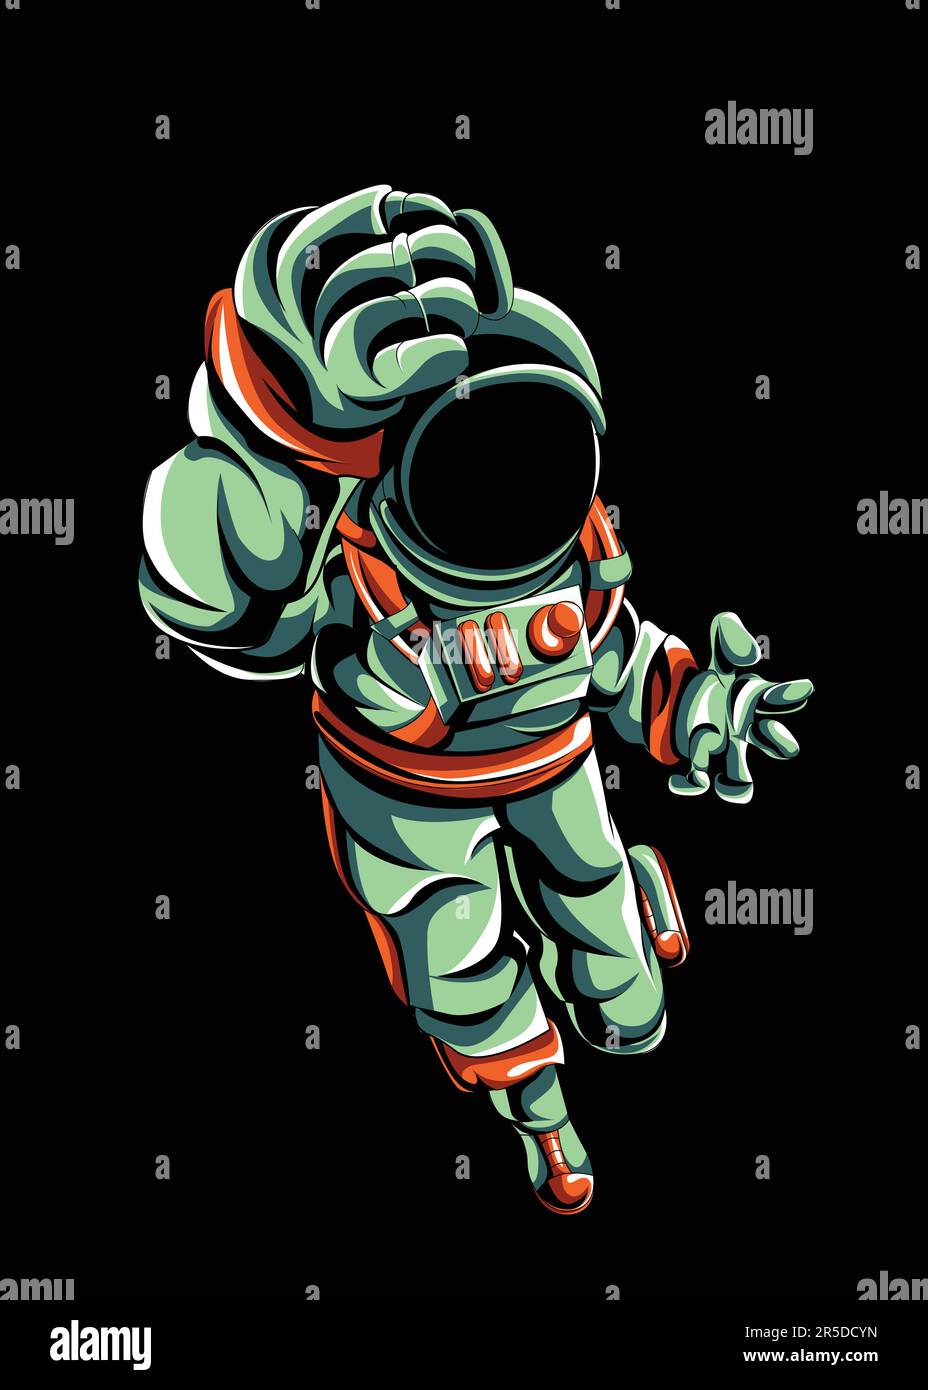 https://c8.alamy.com/comp/2R5DCYN/space-astronaut-character-suitable-as-a-birthday-gift-to-your-friends-celebration-event-or-space-community-and-astronaut-space-tour-2R5DCYN.jpg